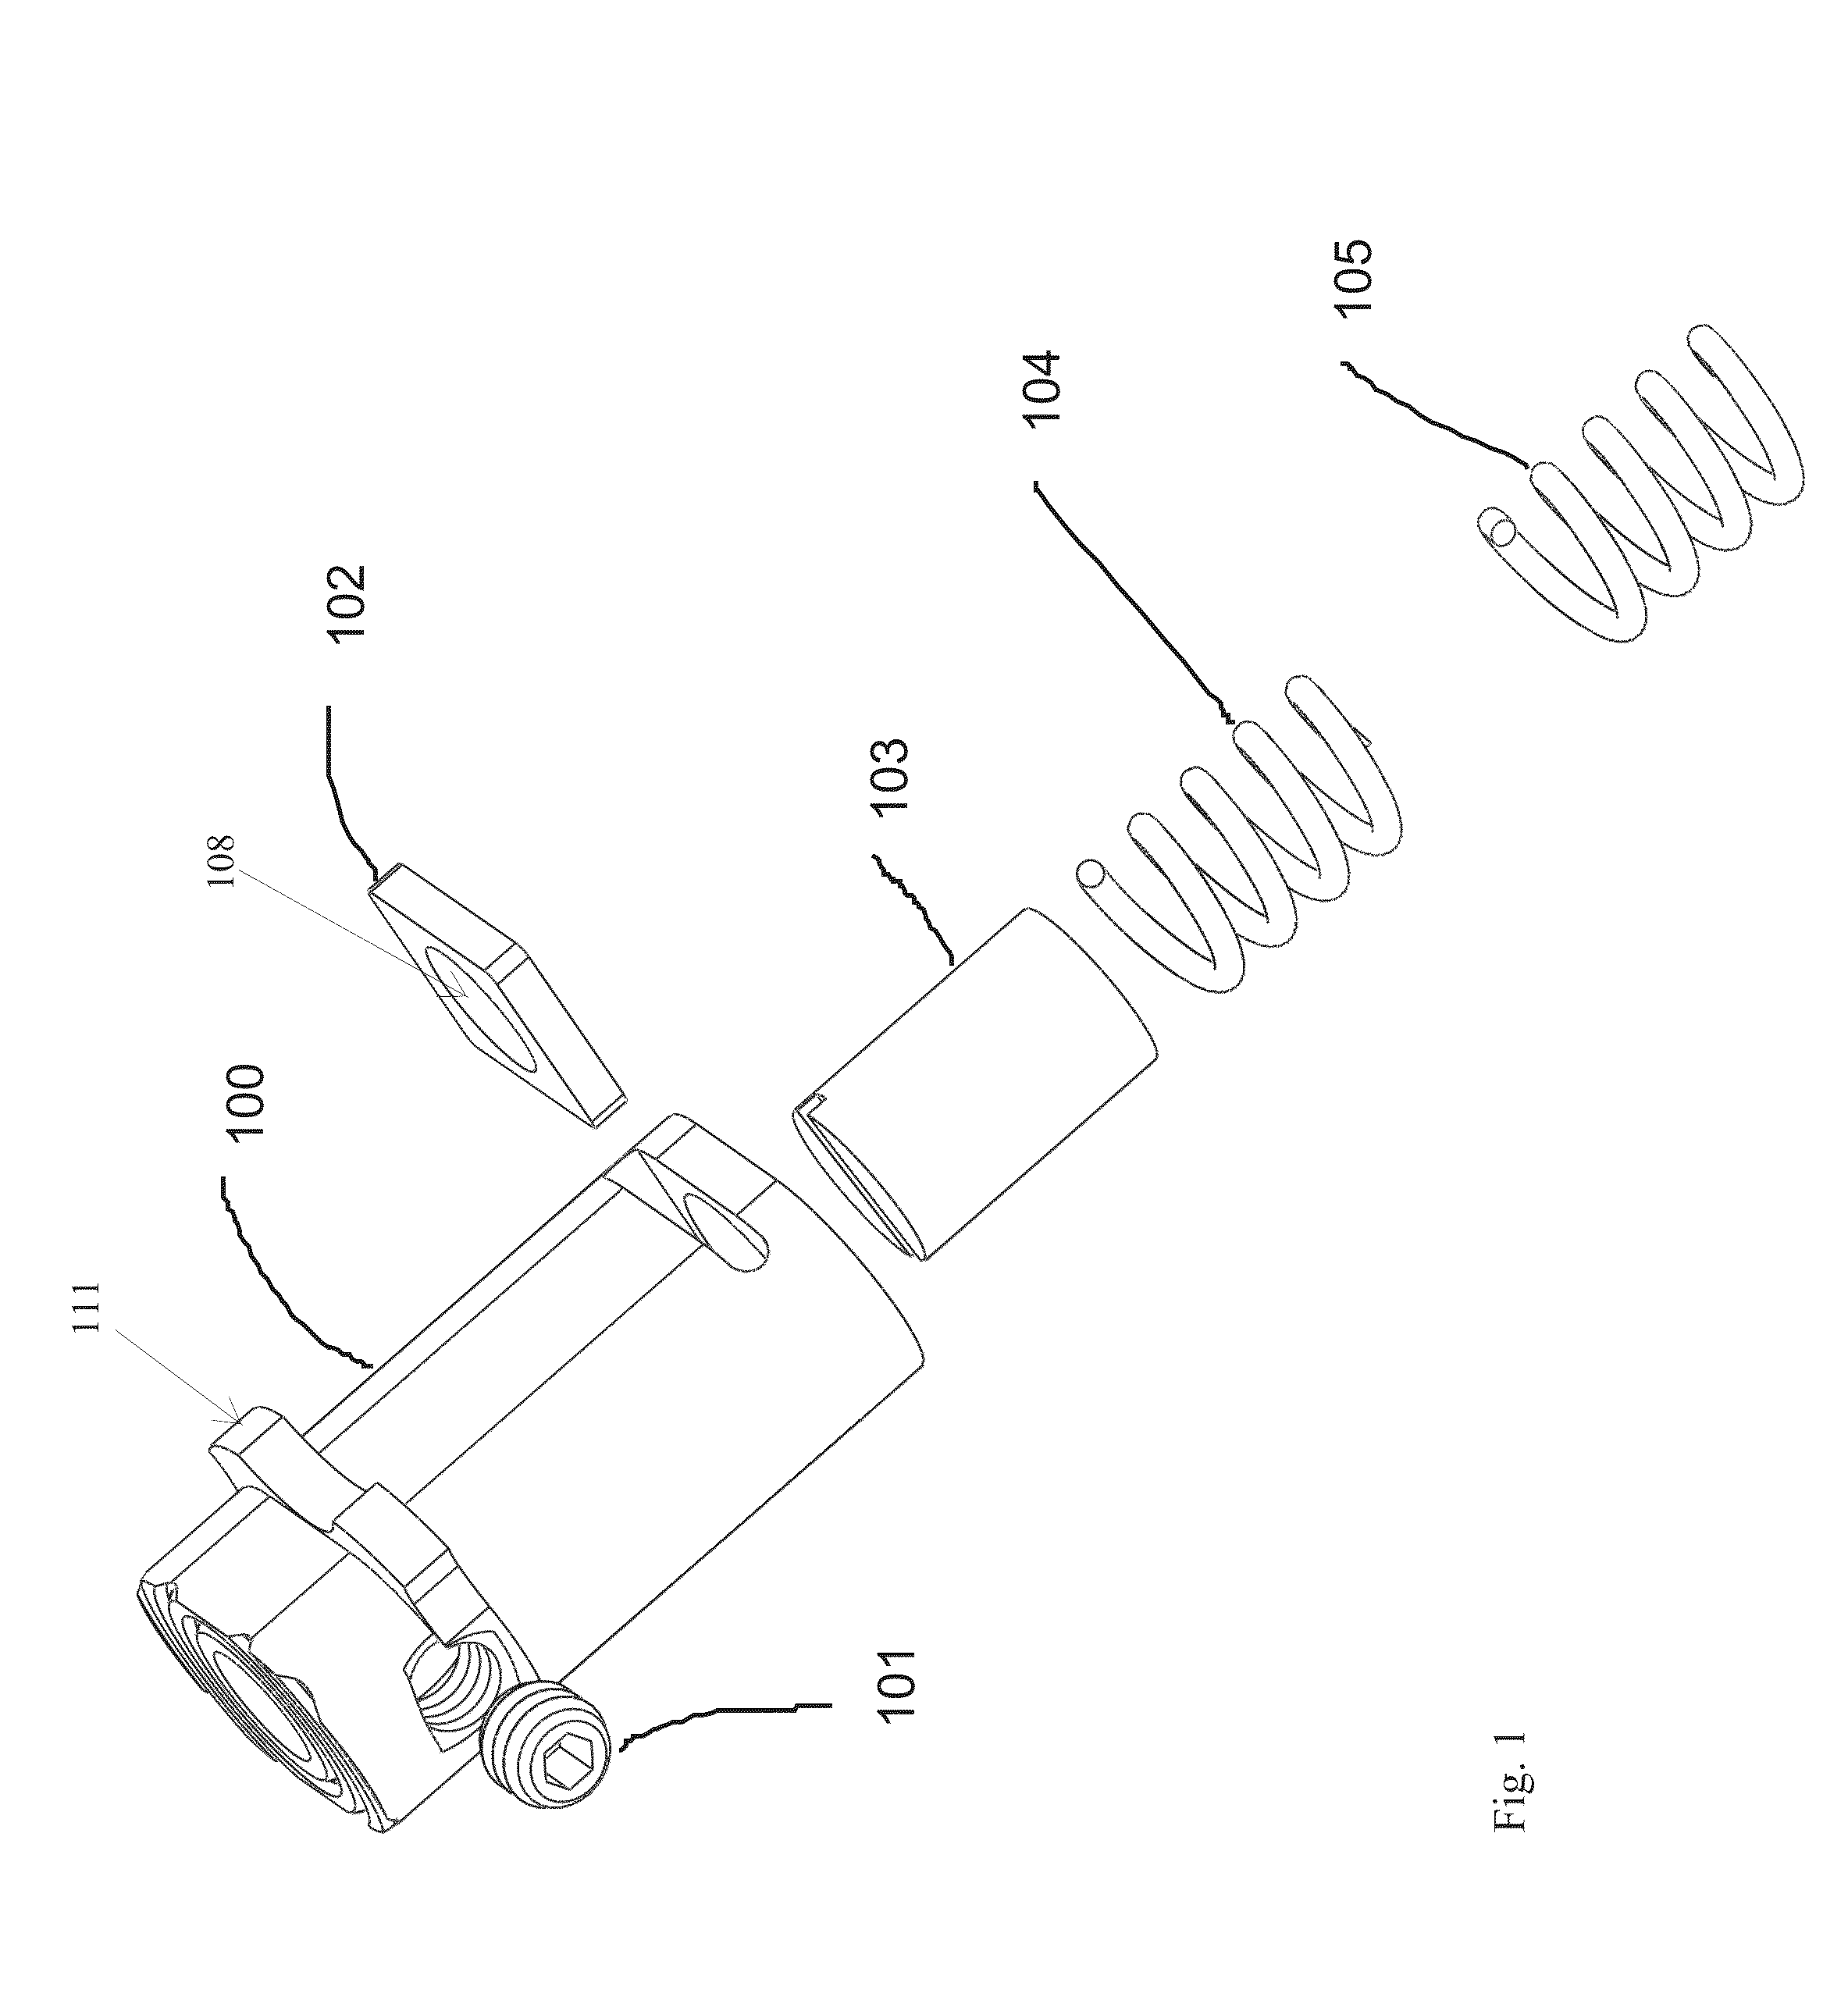 Systems and methods for locking and releasing detachable firearm magazines